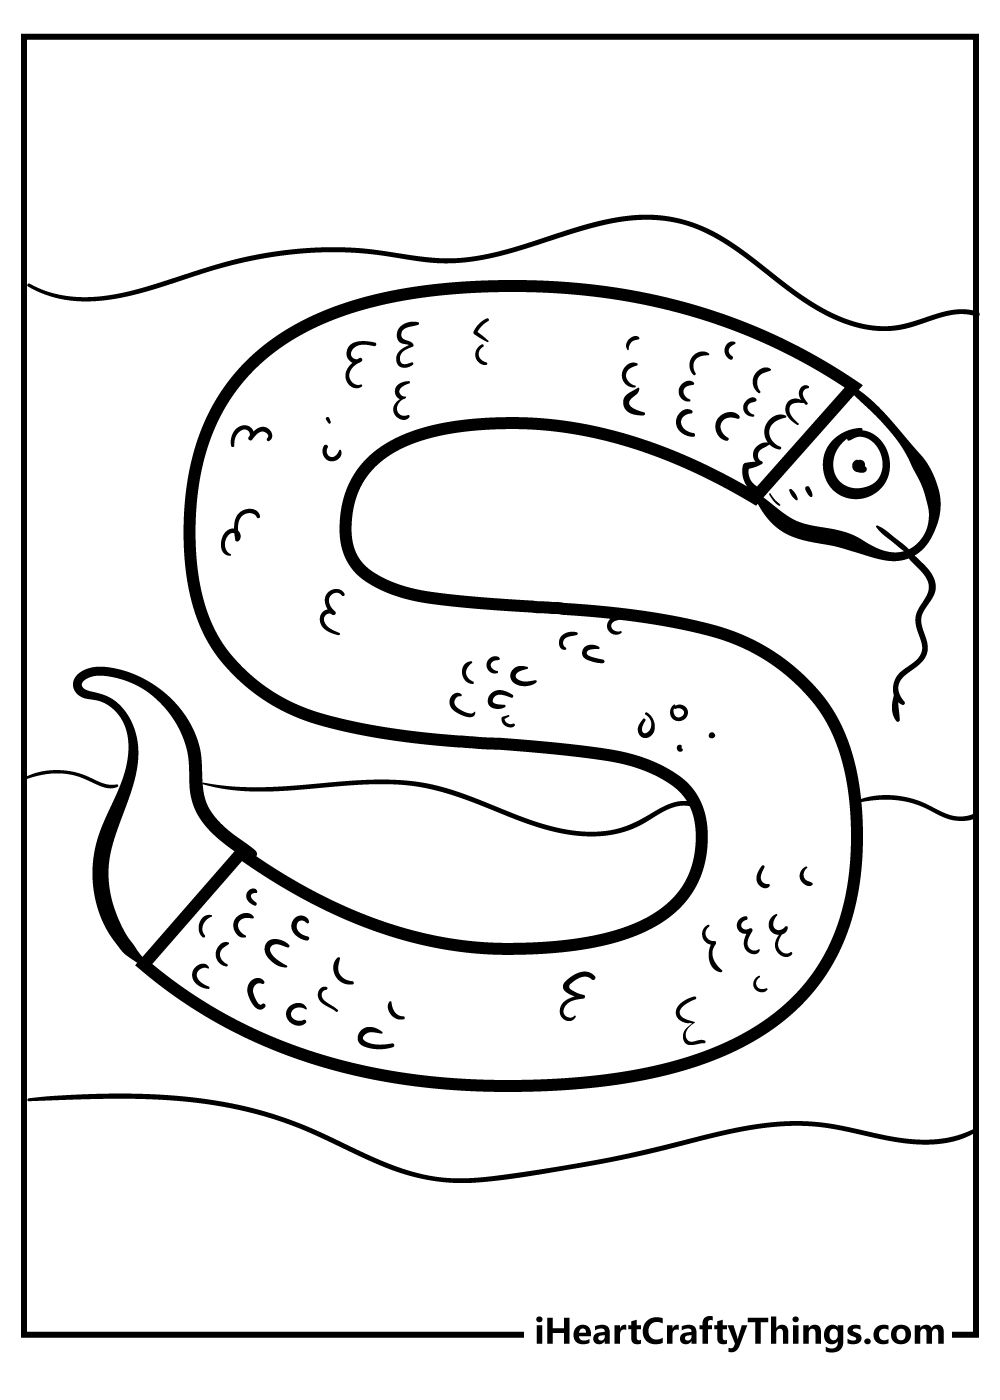 Letter S Coloring Pages for preschoolers free printable